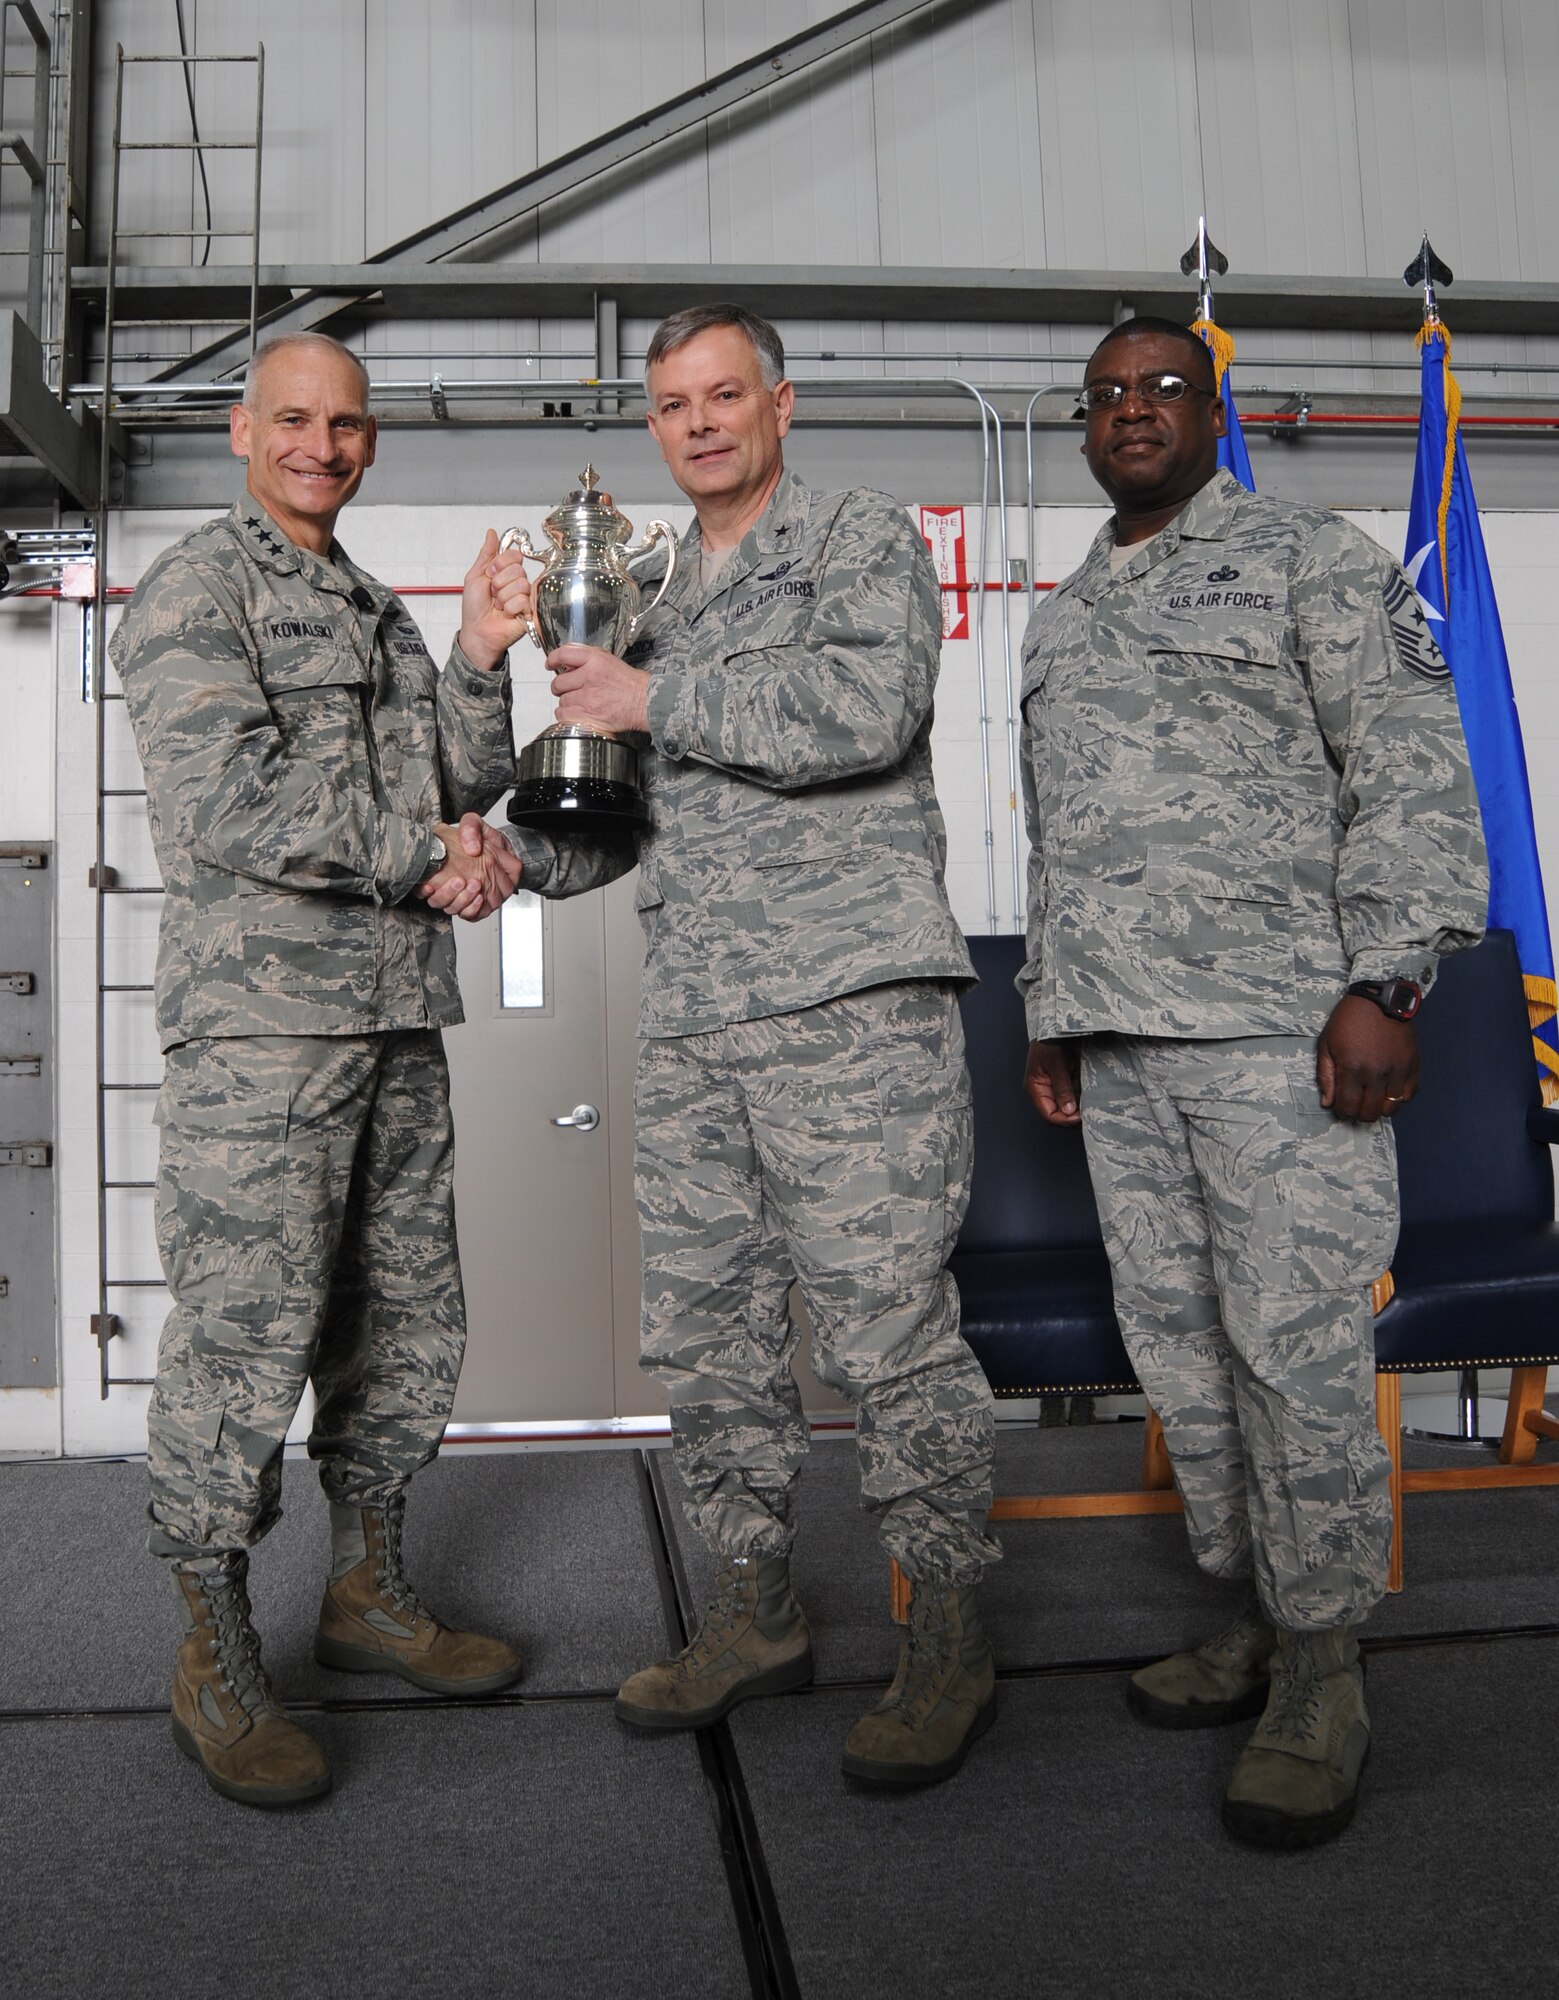 Lt. Gen. James Kowalski, U.S. Strategic Command deputy commander, presents the Omaha Trophy to Brig. Gen. Glen VanHerck, 509th Bomb Wing commander, and Chief Master Sgt. Lee Barr, 509th Bomb Wing command chief, during a ceremony at Whiteman Air Force Base, Mo., April 28, 2014. The trophy is awarded annually to four outstanding units that represent USSTRATCOM’s mission areas. Winners are selected based on formal evaluations, meritorious achievement, safety and other factors such as community involvement and humanitarian actions. USSTRATCOM relies on various task forces for the execution of its global missions, including space operations, information operations, missile defense, global command and control, intelligence, surveillance and reconnaissance (ISR), global strike and strategic deterrence, and combatting weapons of mass destruction. (U.S. Air Force photo by Senior Airman Bryan Crane/Released)